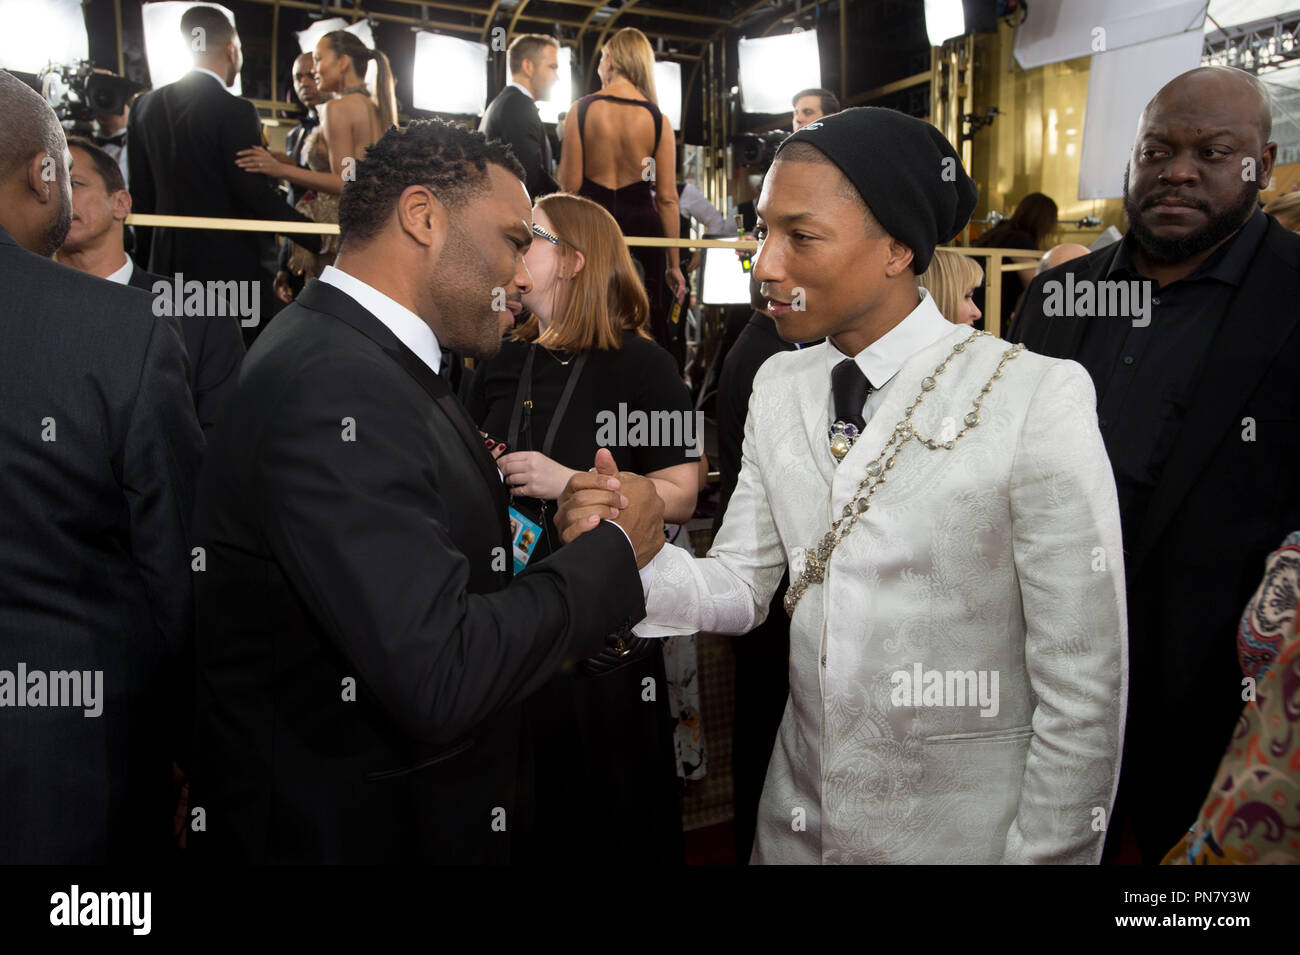 Nominated for BEST PERFORMANCE BY AN ACTOR IN A TELEVISION SERIES – COMEDY OR MUSICAL for his role in 'Black-ish,' actor Anthony Anderson and nominated for BEST ORIGINAL SCORE – MOTION PICTURE for 'Hidden Figures,' Pharrell Williams attend the 74th Annual Golden Globes Awards at the Beverly Hotel in Beverly Hills, CA on Sunday, January 8, 2017.attends the 74th Annual Golden Globes Awards at the Beverly Hilton in Beverly Hills, CA on Sunday, January 8, 2017.  File Reference # 33198 197JRC  For Editorial Use Only -  All Rights Reserved Stock Photo